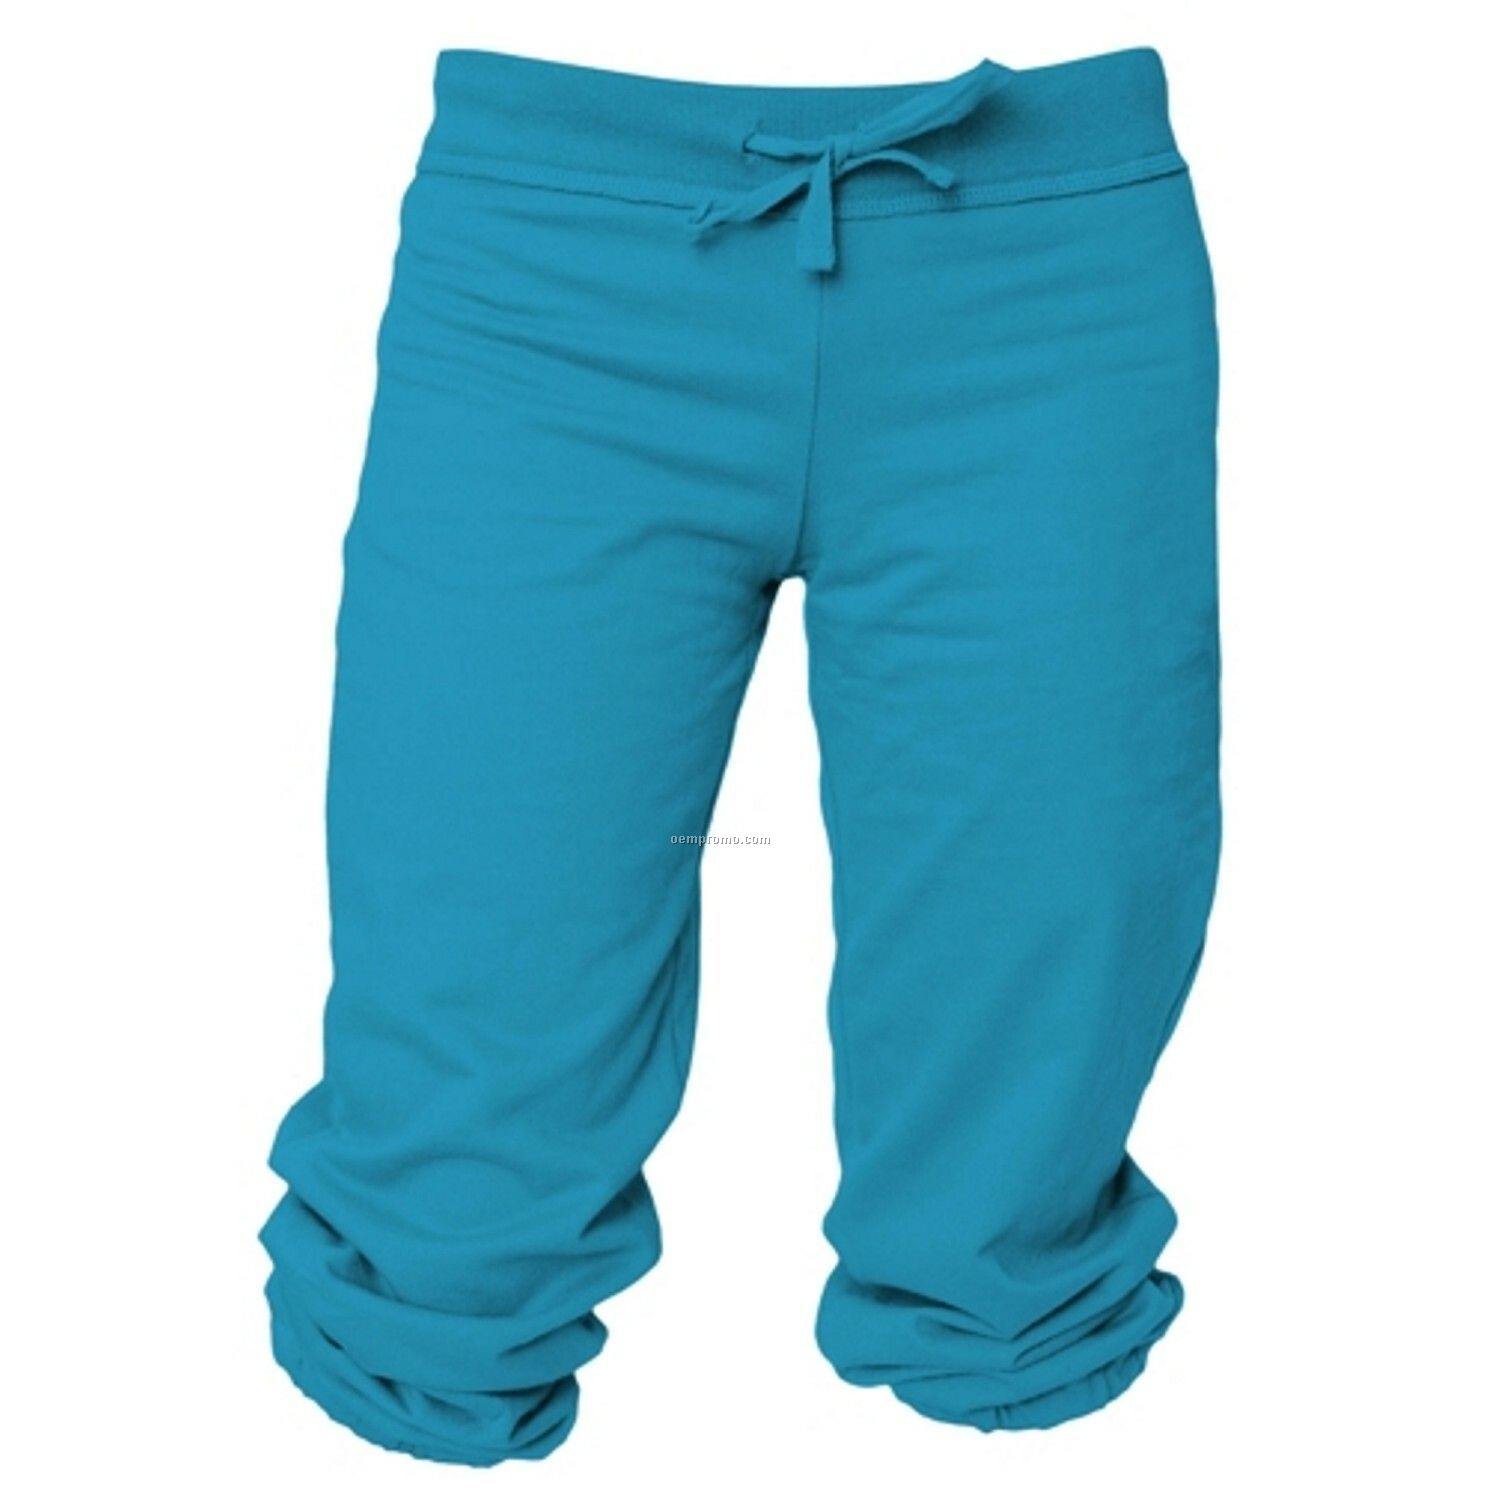 Adult Turquoise Blue Touchdown Cuffed Sweat Capris